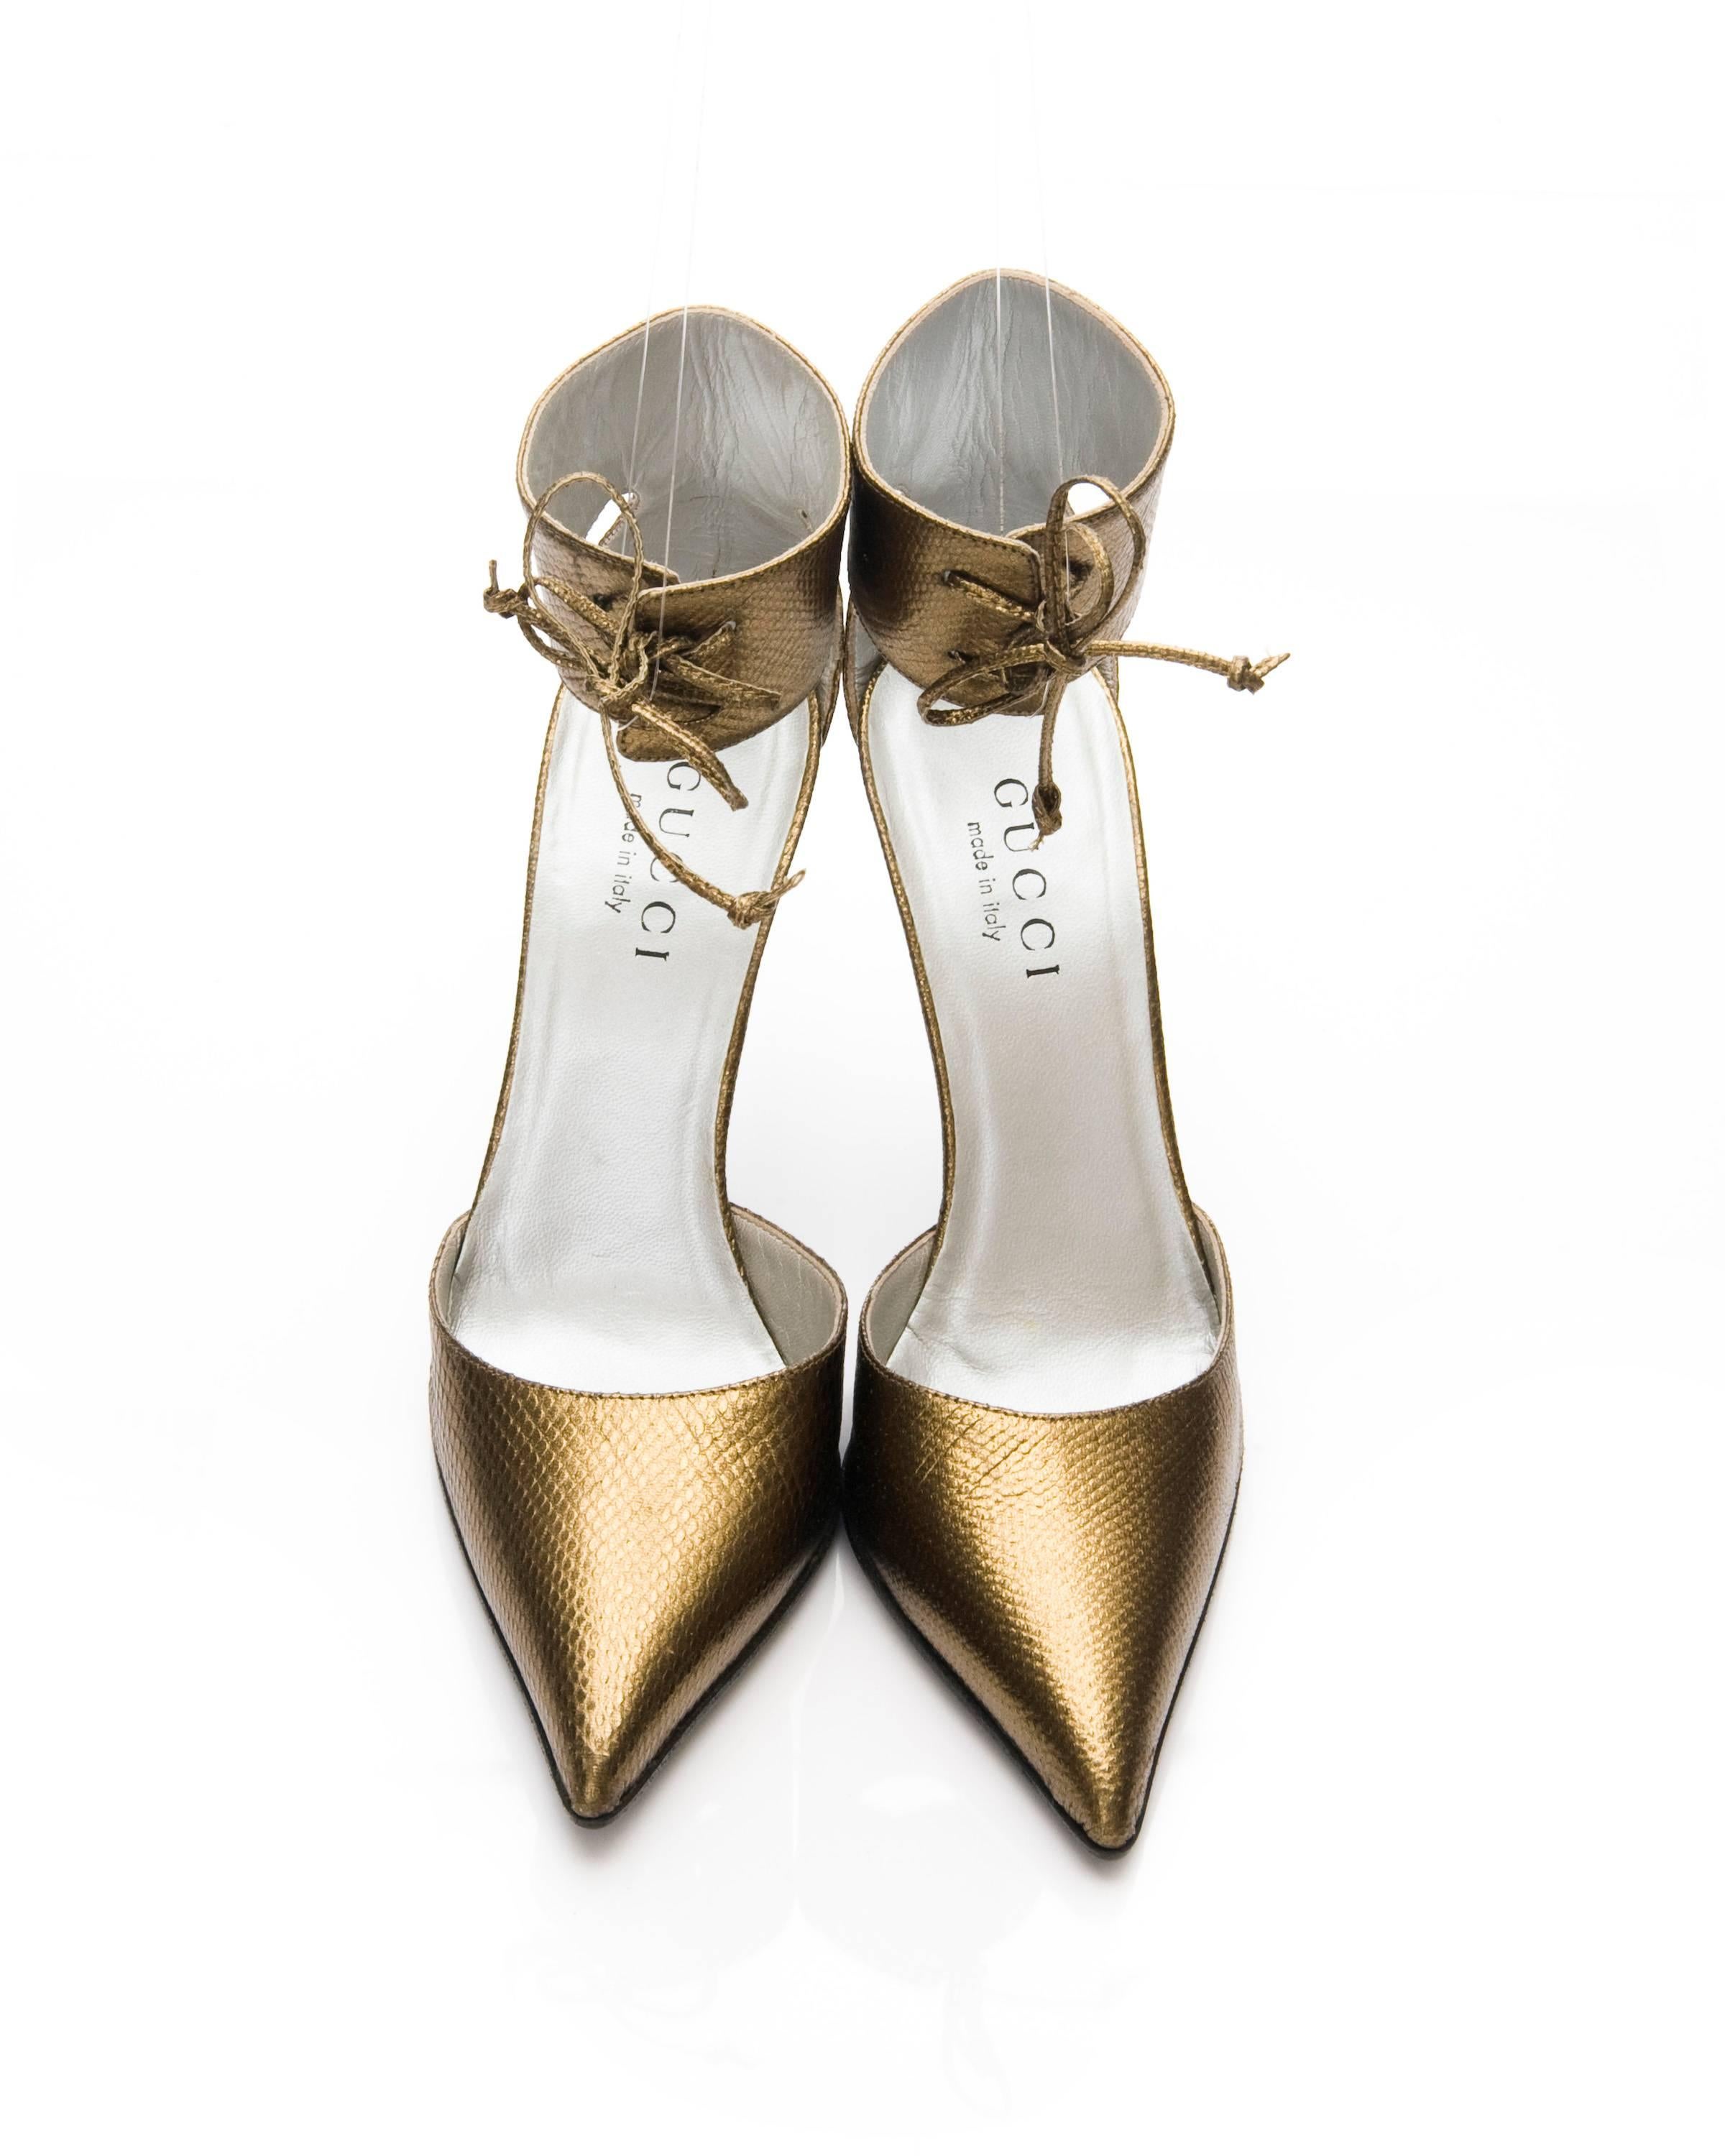 New Tom Ford for Gucci Kate Moss Ad Runway Heels Pumps  4